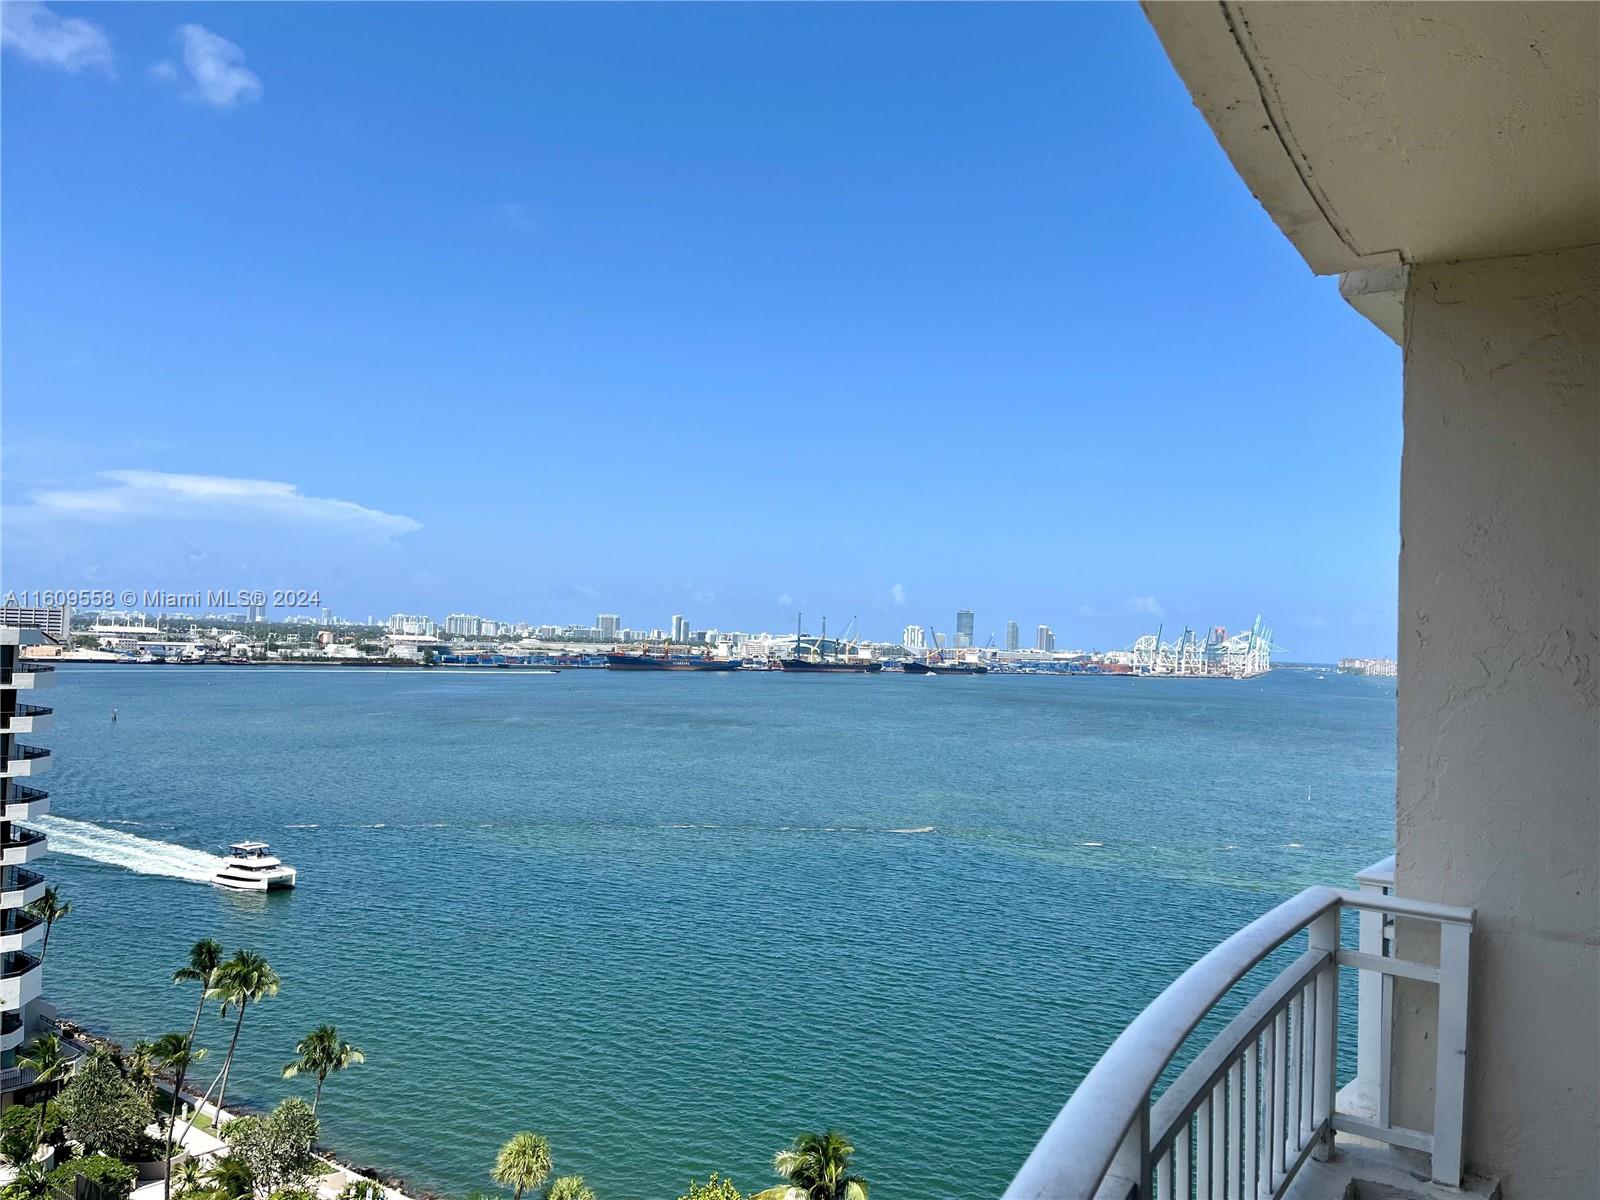 Beautifully updated unit, freshly painted with stunning waterfront views. The building offers 24-hour security, valet parking, a business center, and a fully equipped clubroom. Enjoy the tranquility and privacy of Brickell Key, while being just a short walk from Brickell City Center and the financial Brickell district.  Note: The pool and tennis court are currently being renovated and expected to be ready soon. Easy to show! For showings, please see broker's remarks.